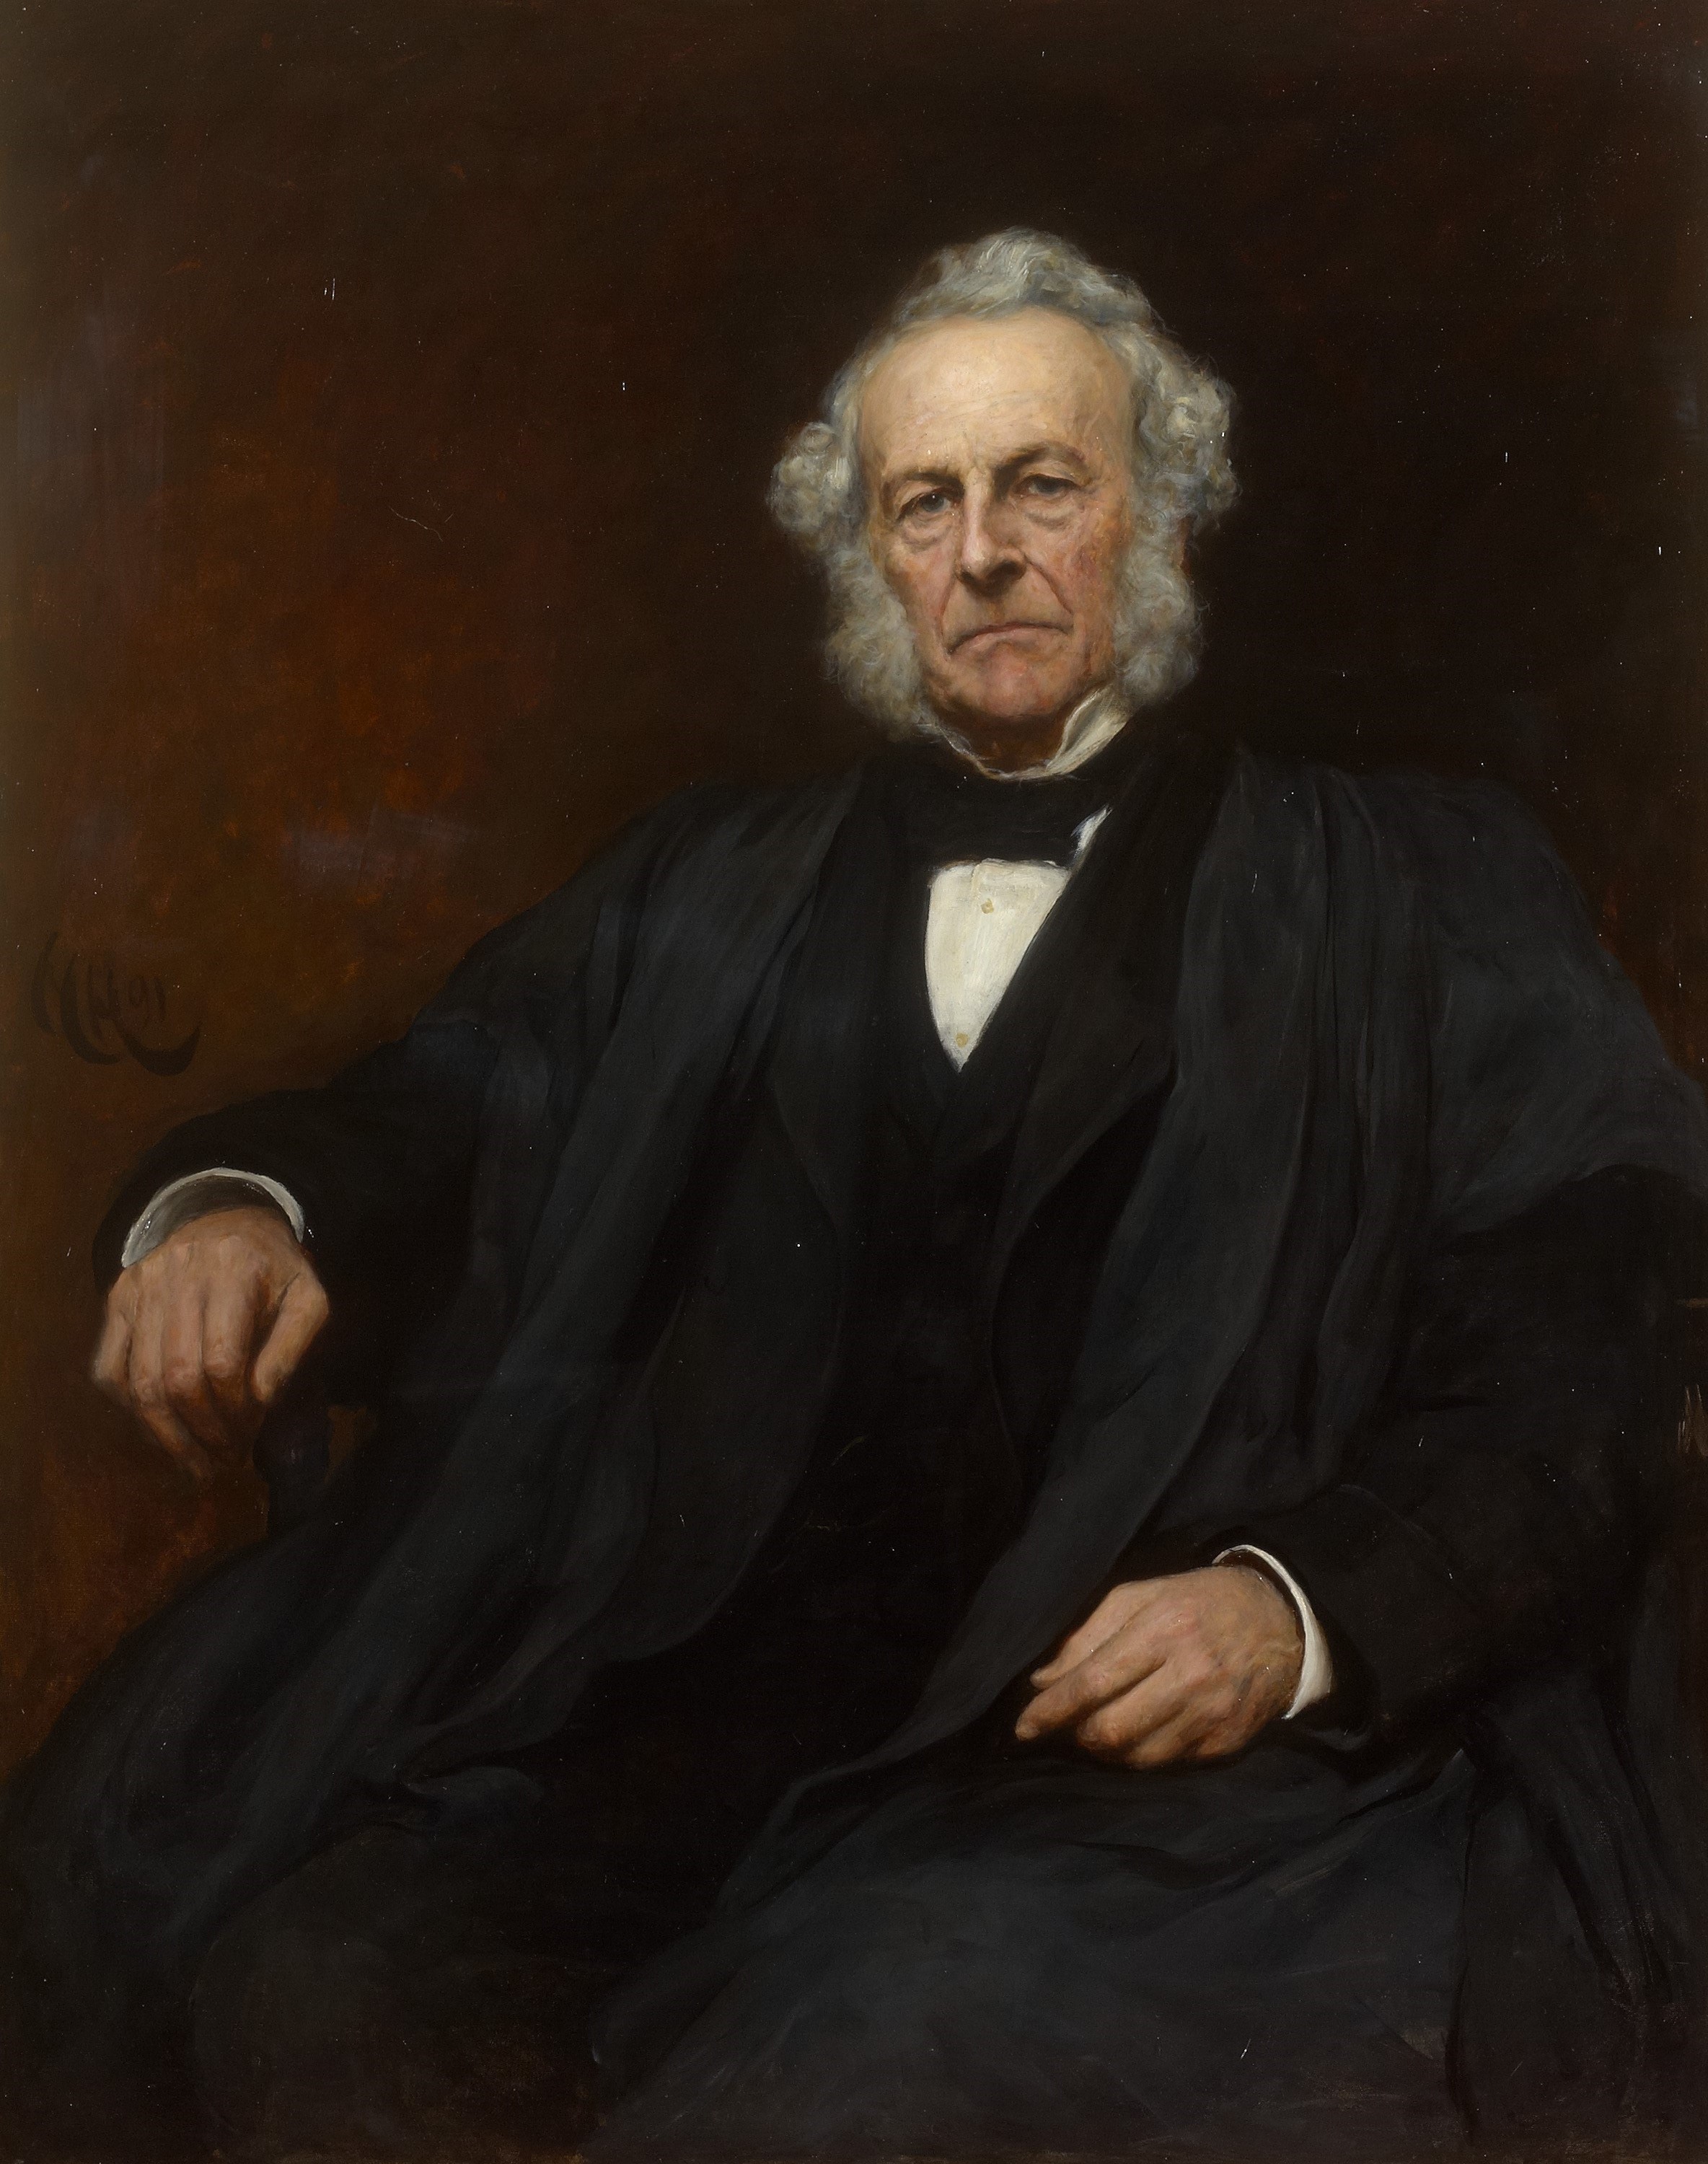 George Gabriel Stokes, secretary and editor of the Transactions 1854-85